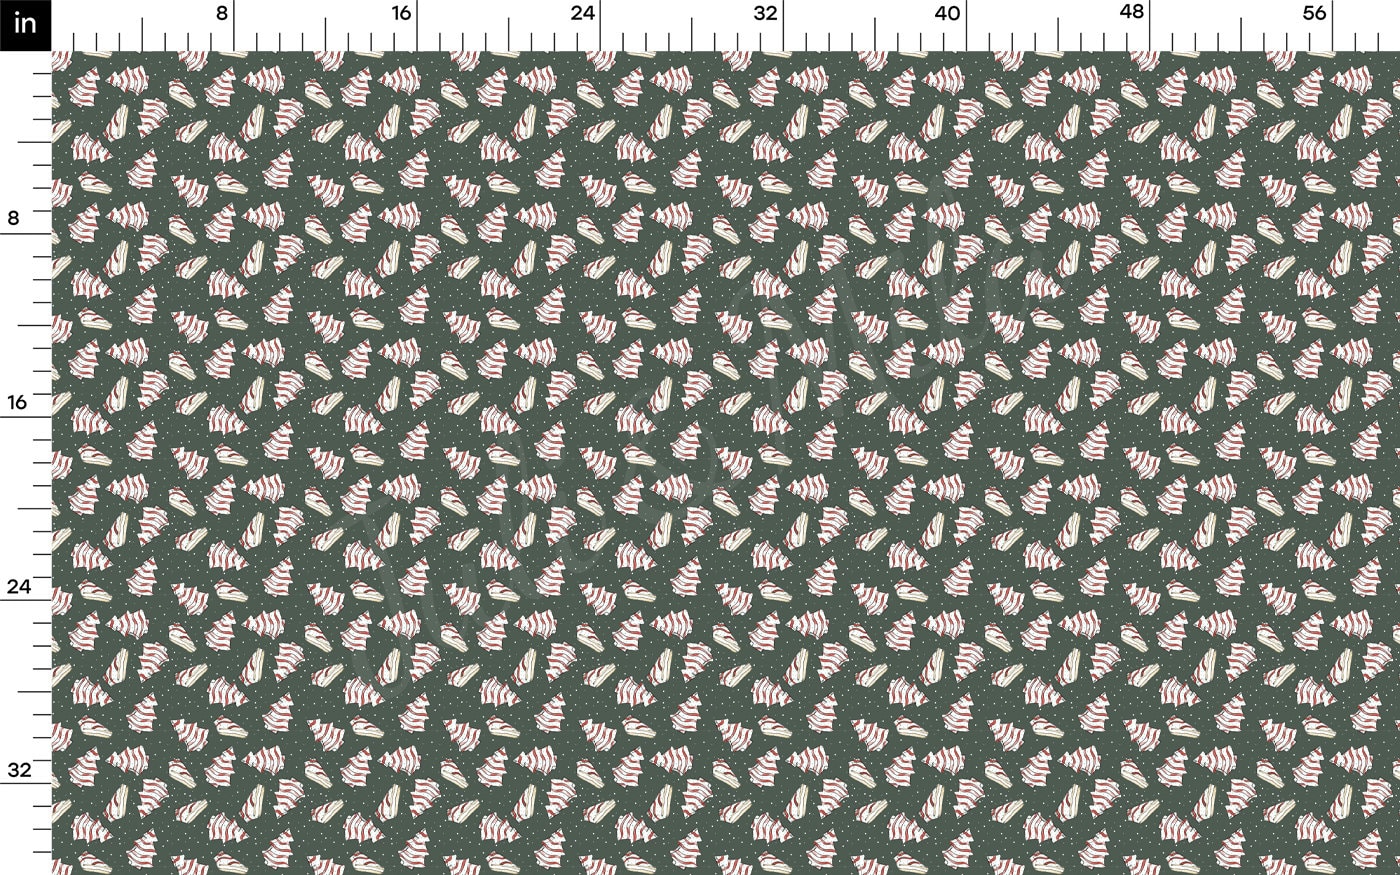 Christmas DBP Fabric Double Brushed Polyester Fabric by the Yard DBP Jersey Stretchy Soft Polyester Stretch Fabric DBP2086